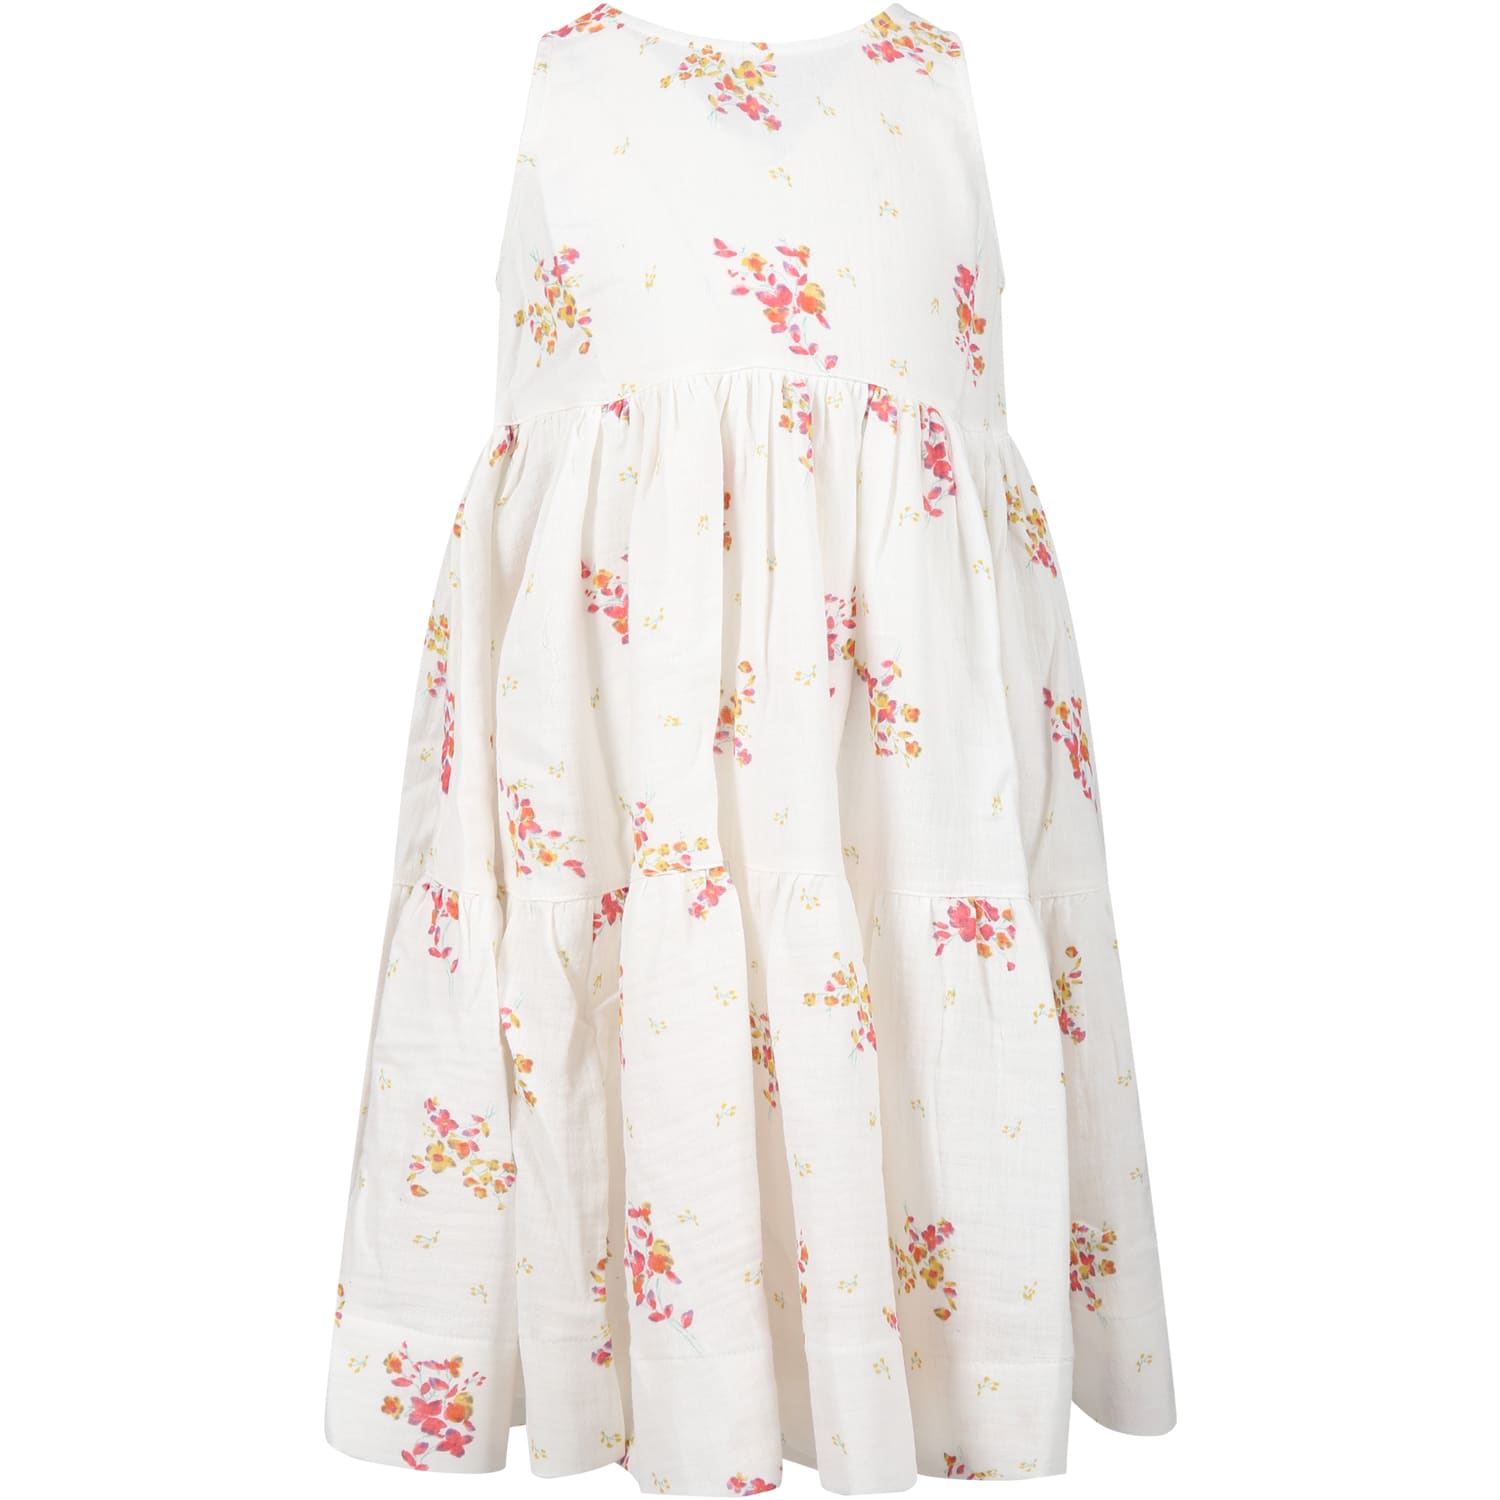 Caffe' D'orzo Kids' White Dress For Girl With Print